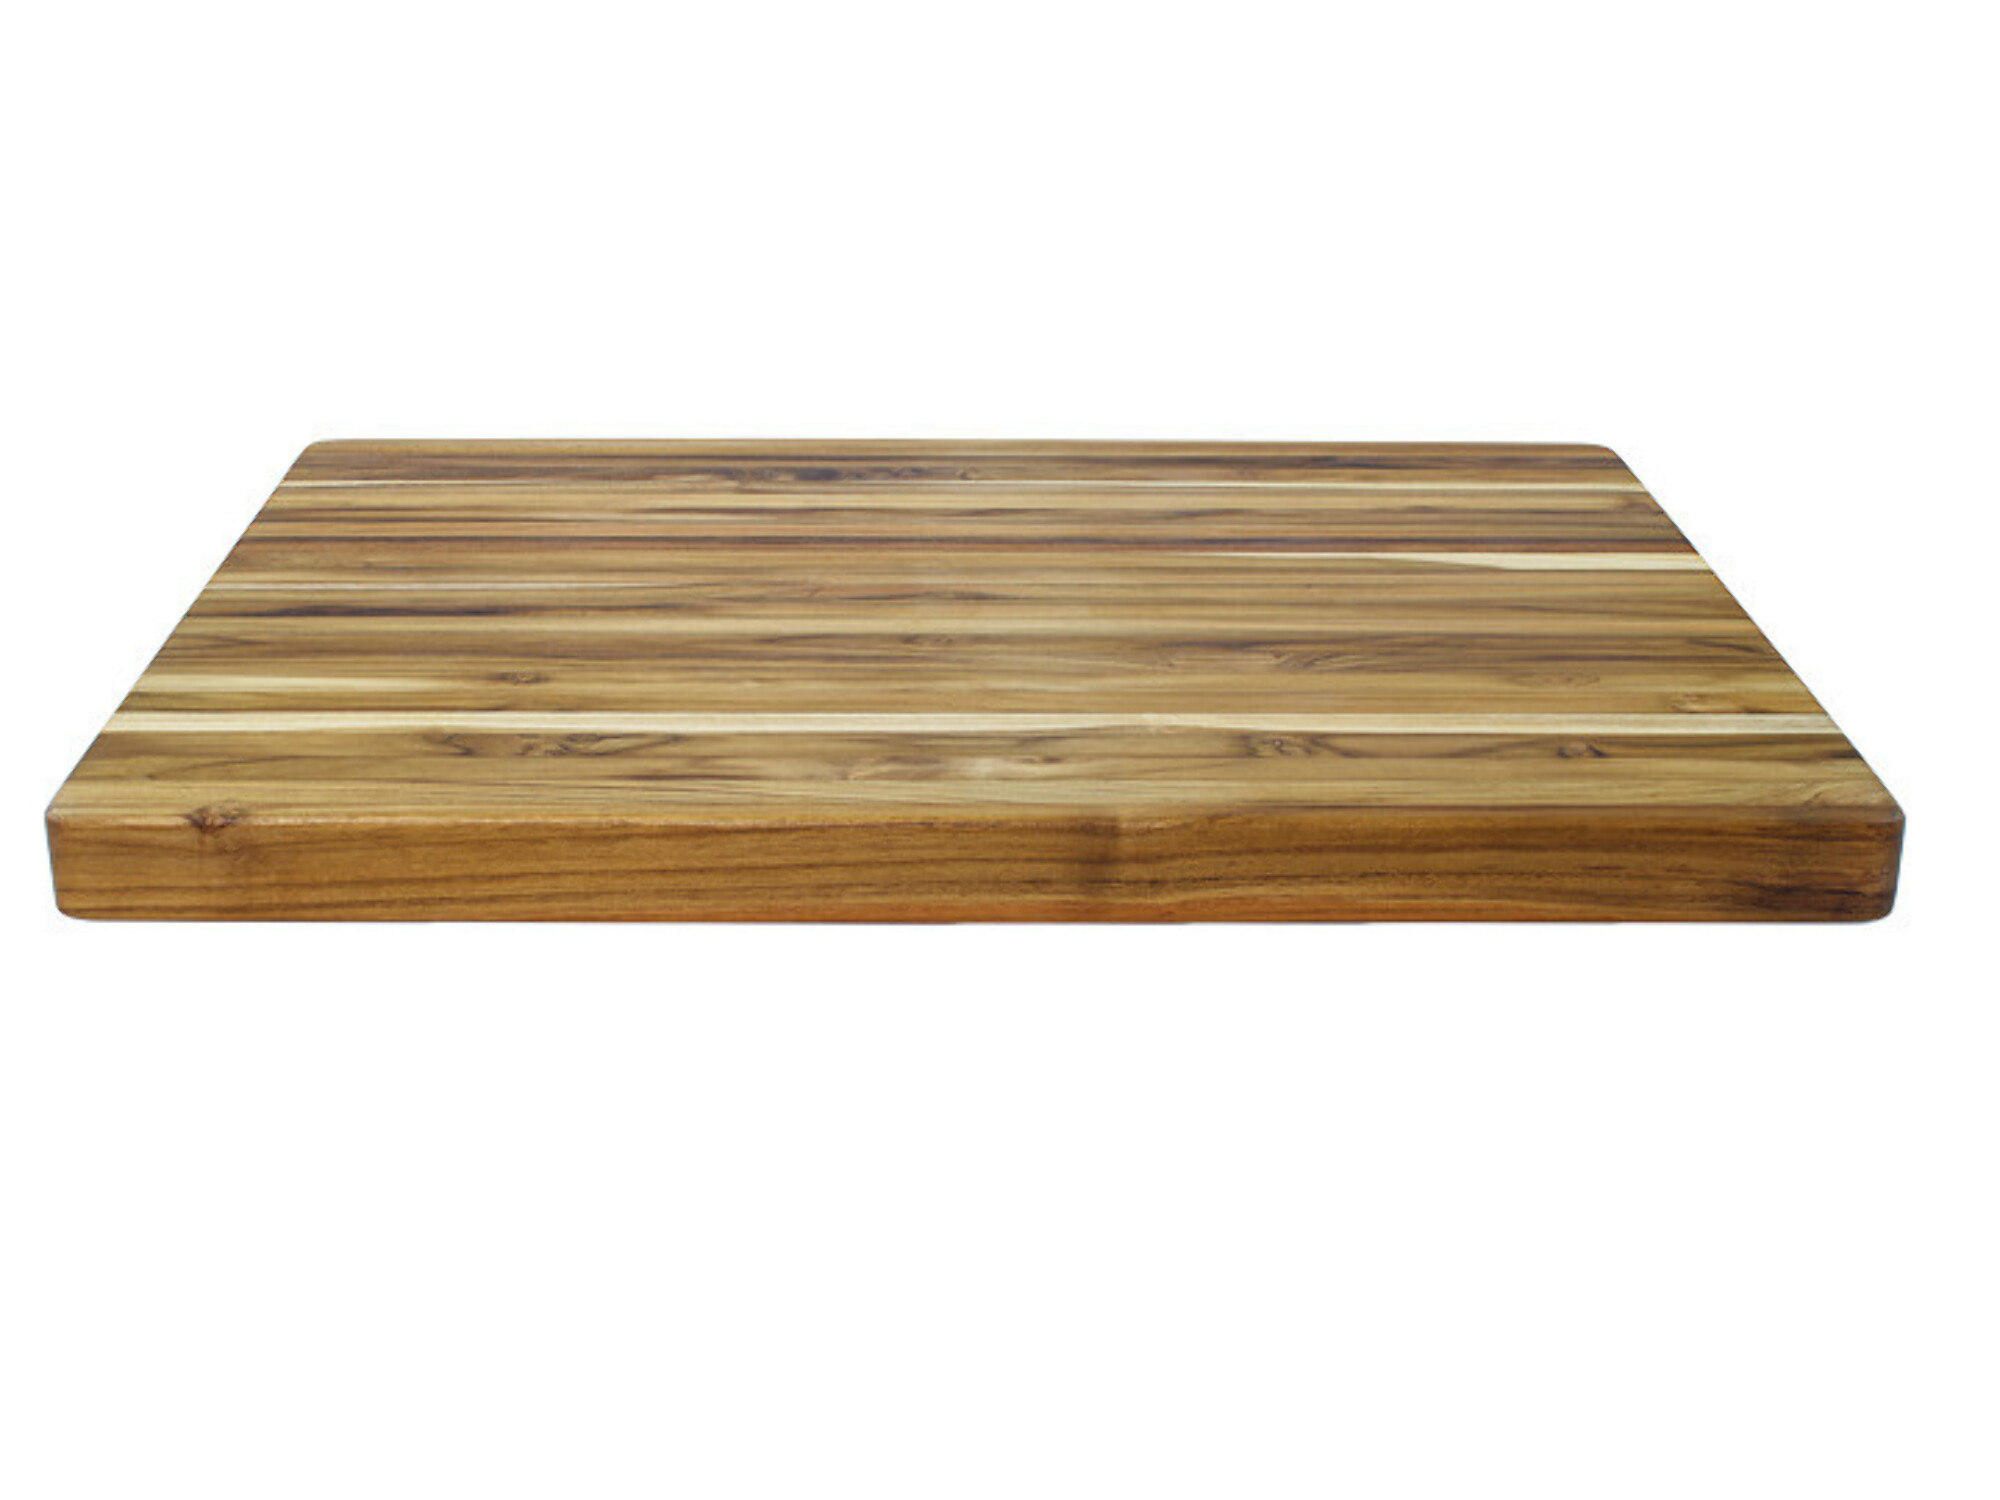 TeakHaus Edge Grain Carving Board w/Hand Grip (Rectangle) | 24" x 18" x 1.5" - image 3 of 6